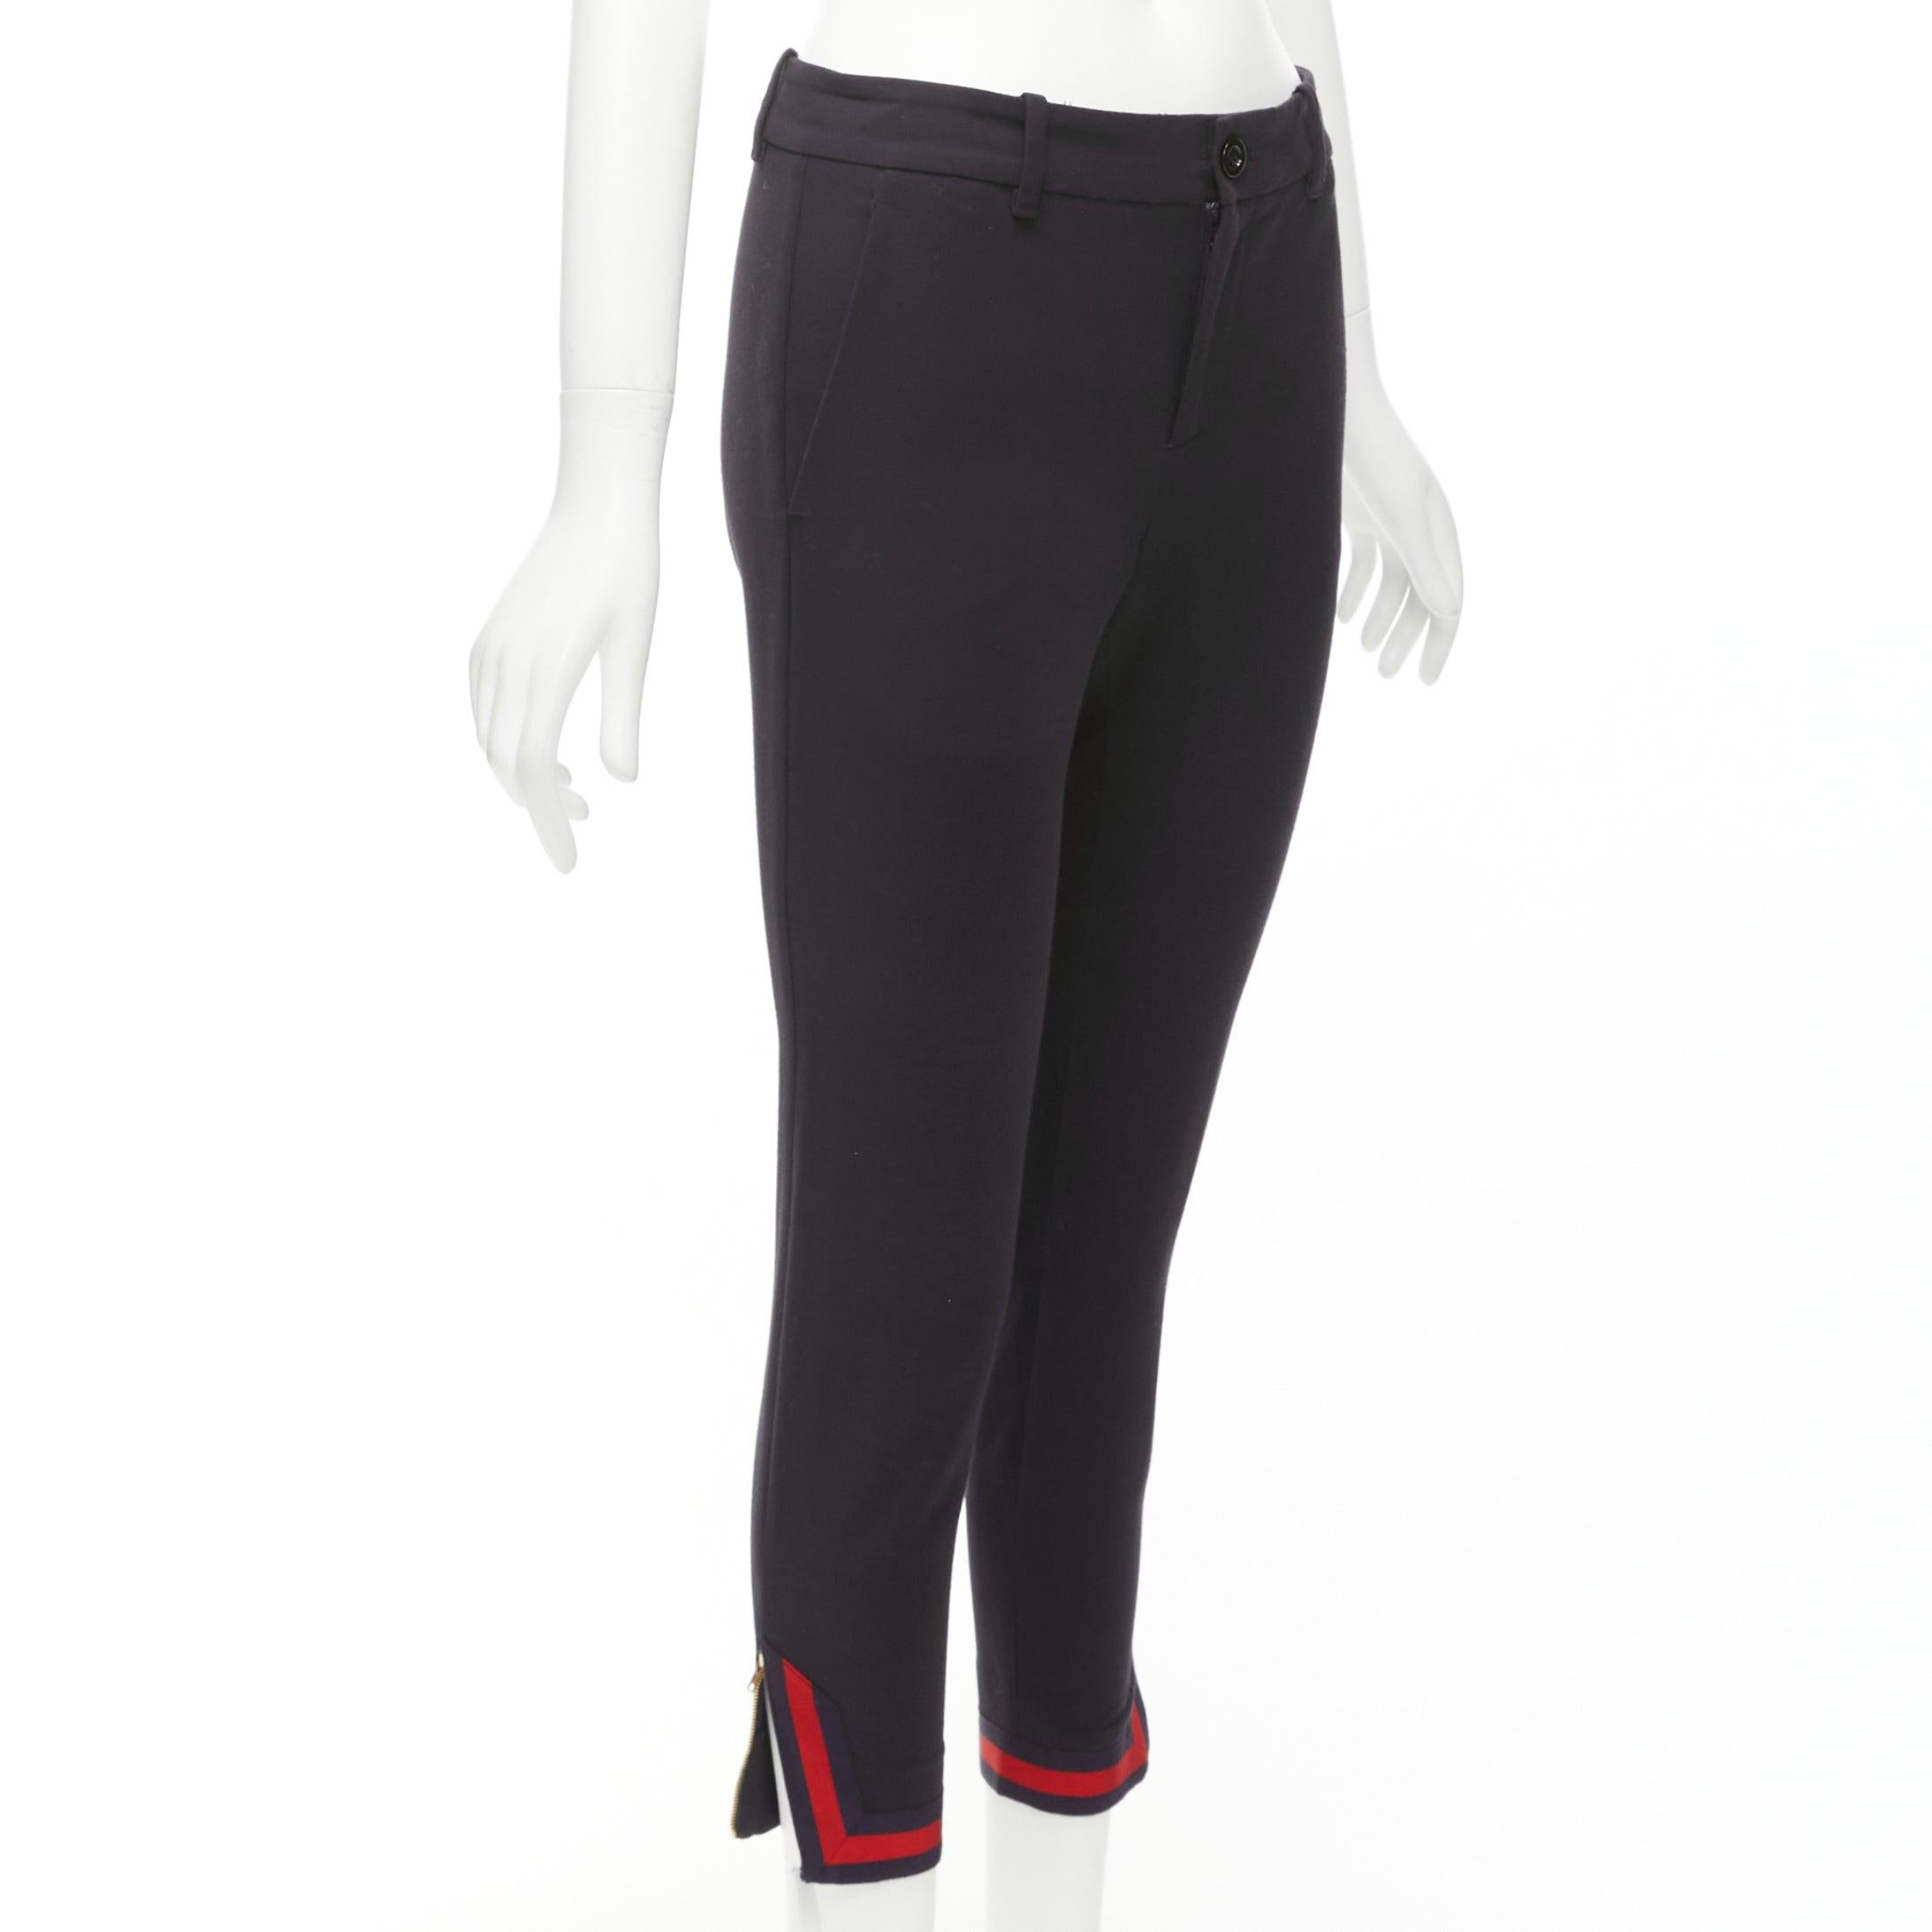 GUCCI black red navy web cuff zip slit mid waist cropped pants IT38 XS
Reference: NKLL/A00195
Brand: Gucci
Material: Fabric
Color: Black, Navy
Pattern: Striped
Closure: Zip Fly
Extra Details: Red navy signature web at cuffs with gold side